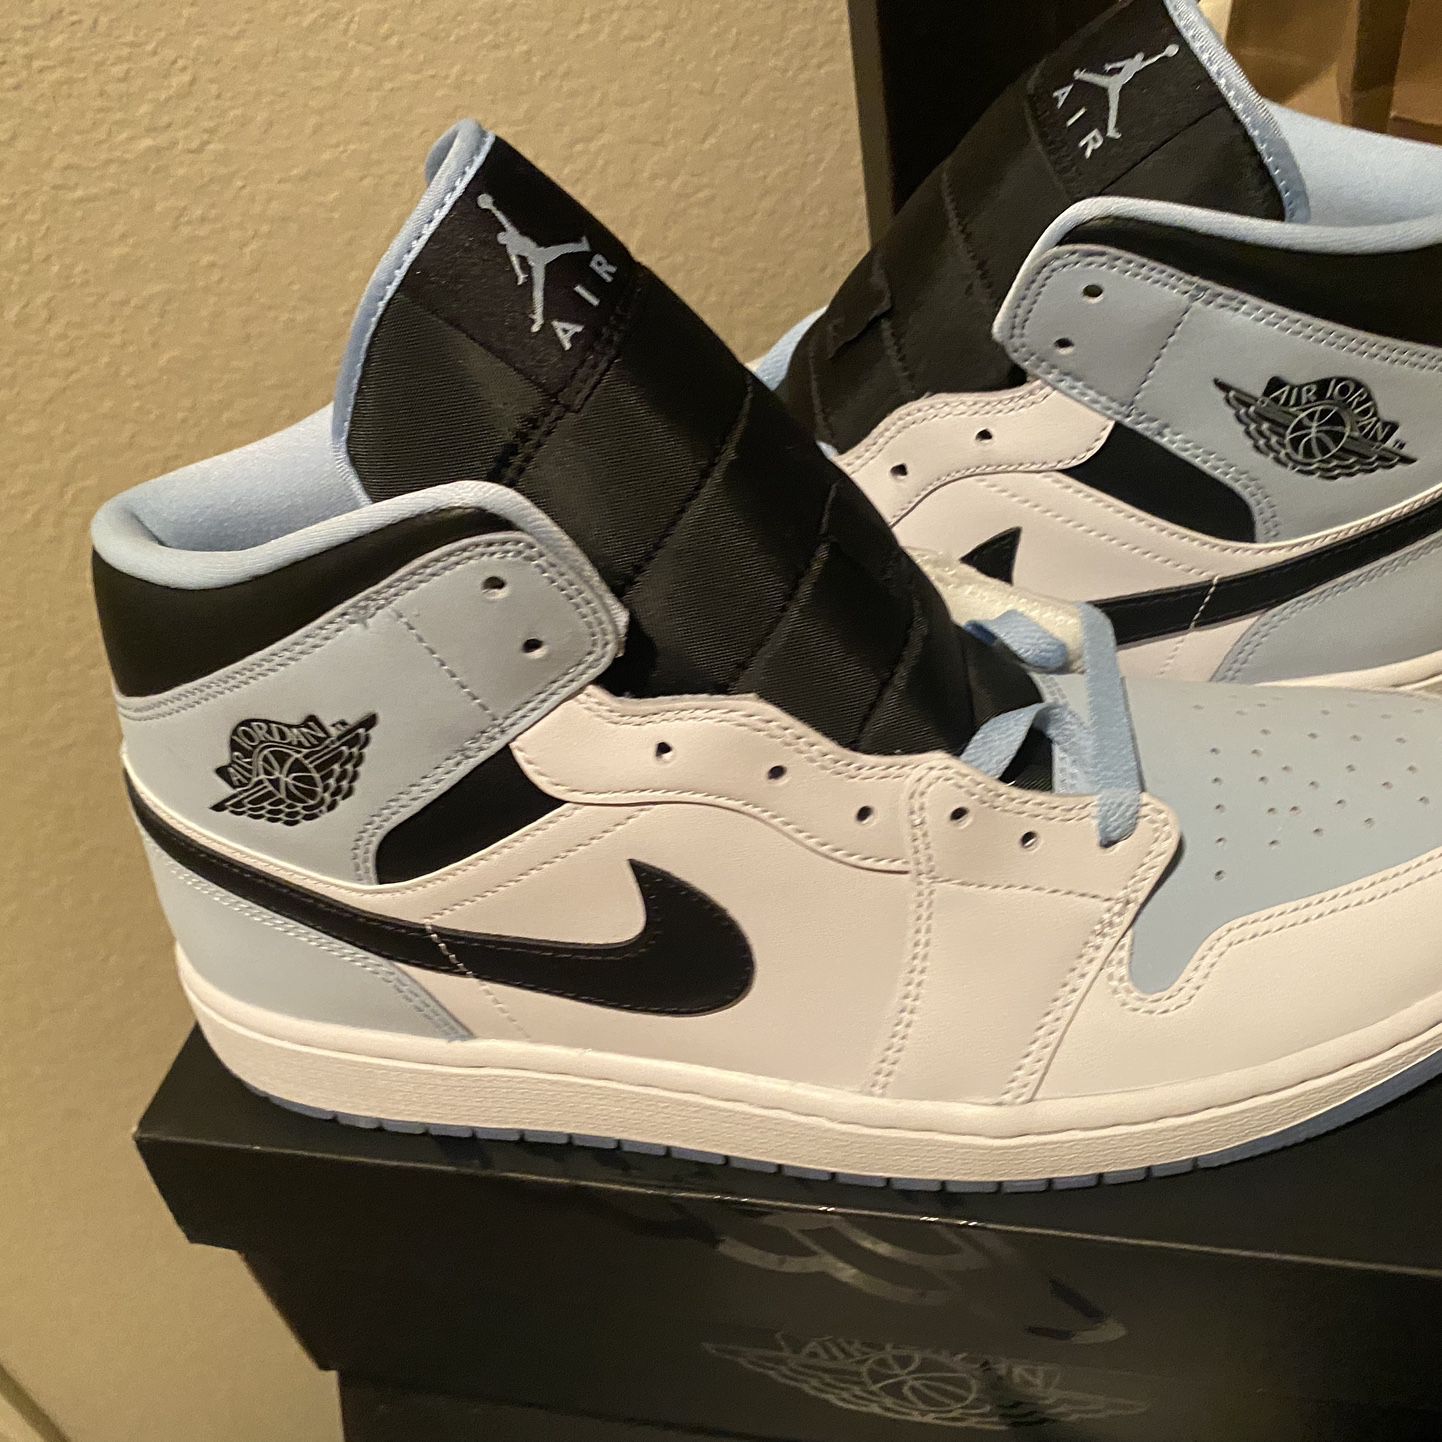 Air Jordan Retro 1 Mid SE Casual Shoes in Blue/White/White Size 11.0 | Leather